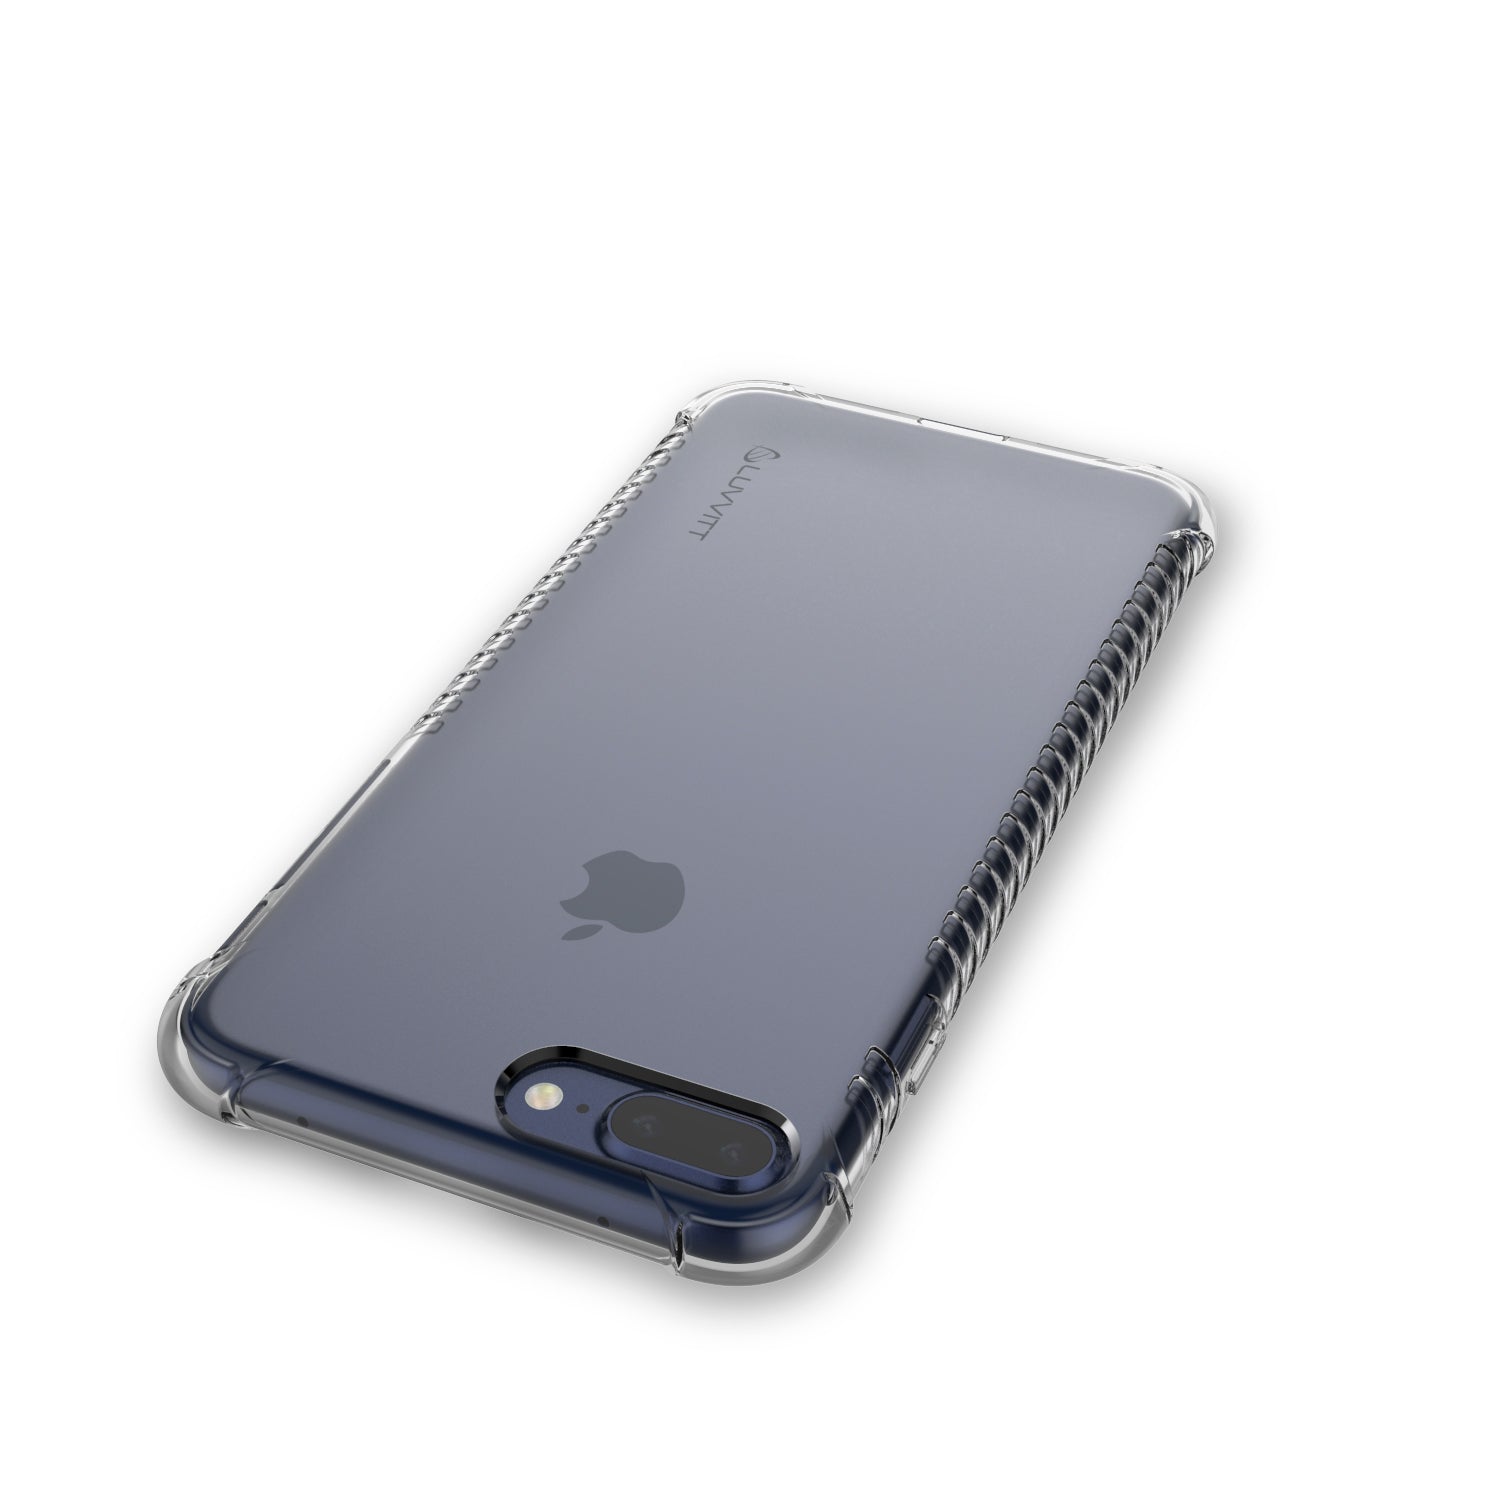 Luvvitt Clear Grip Case for iPhone 8 Plus - Crystal Clear